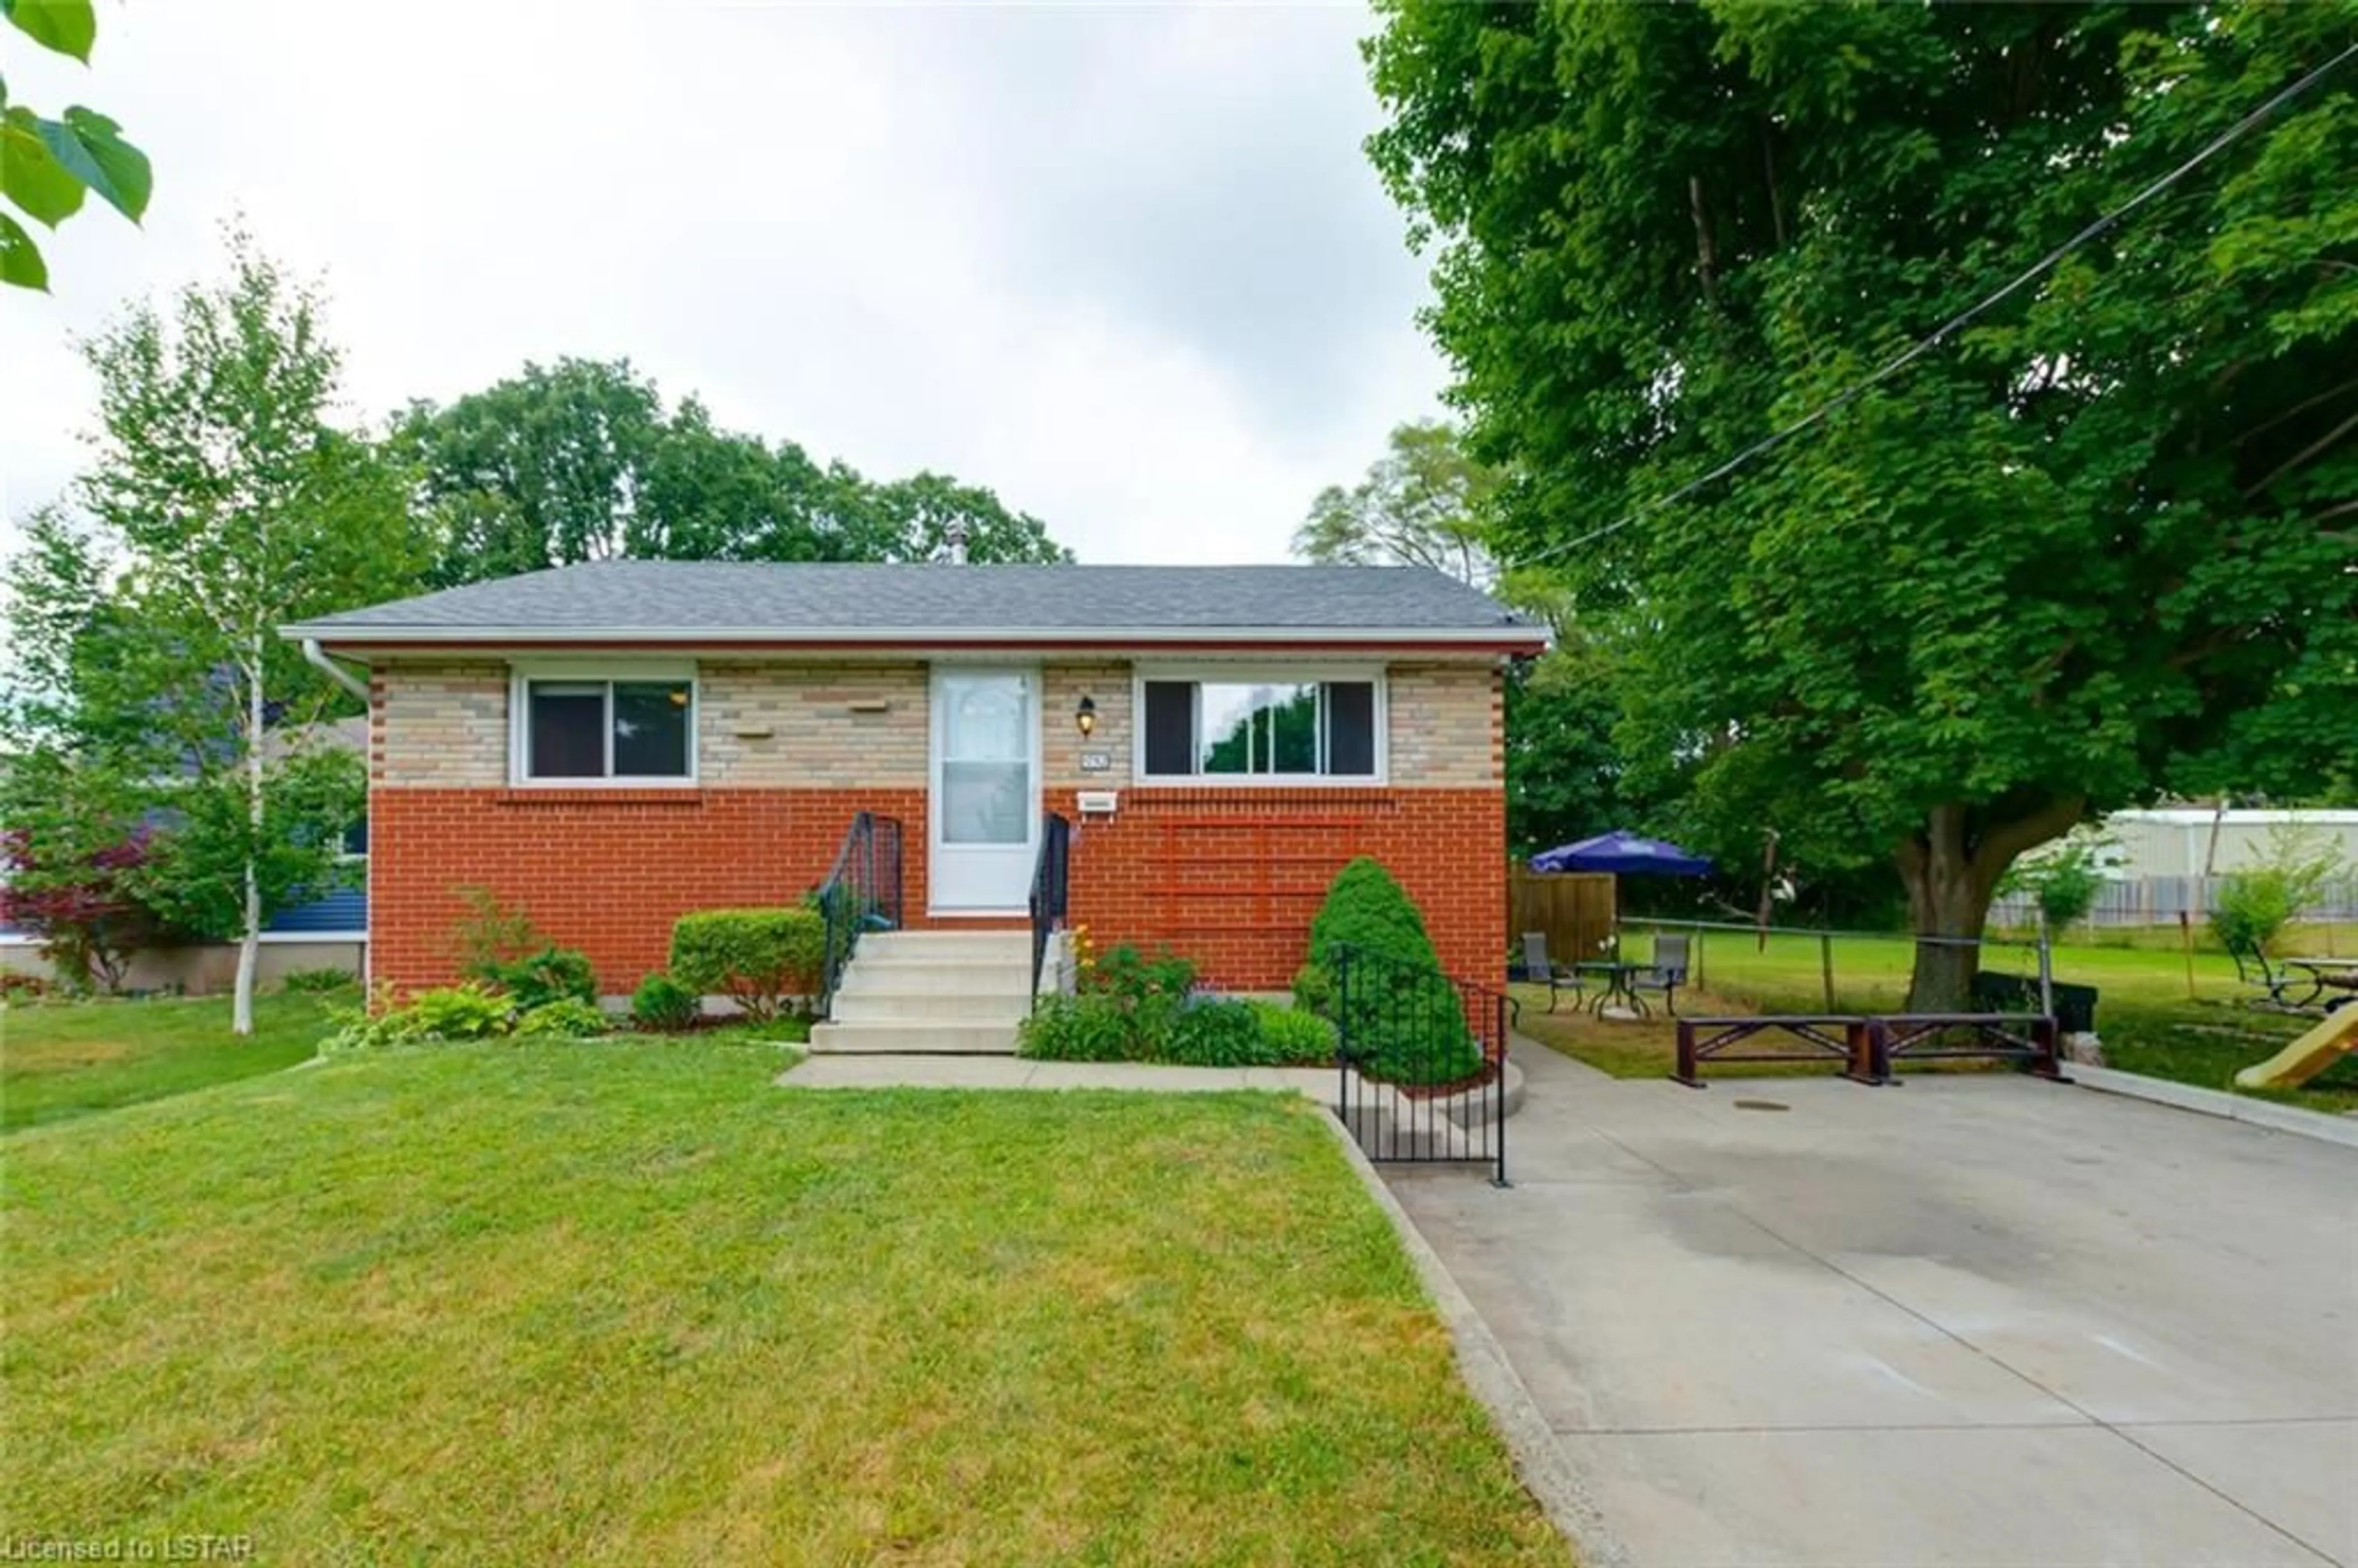 Home with brick exterior material for 1752 Seeley Dr, London Ontario N5W 2B1